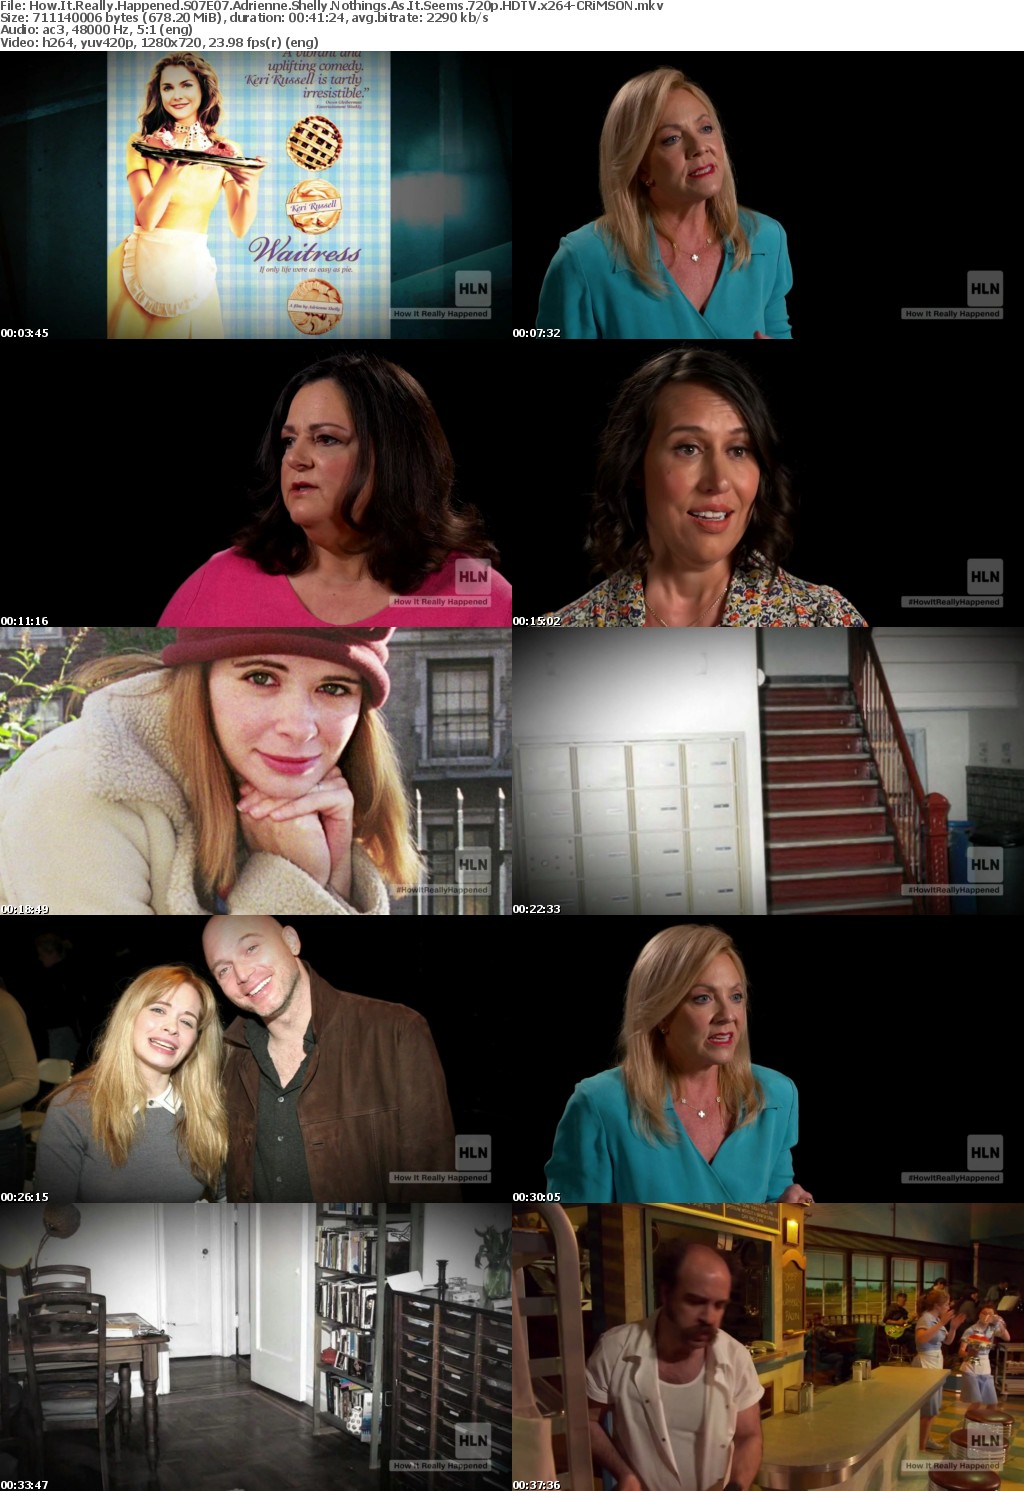 How It Really Happened S07E07 Adrienne Shelly Nothings As It Seems 720p HDTV x264-CRiMSON